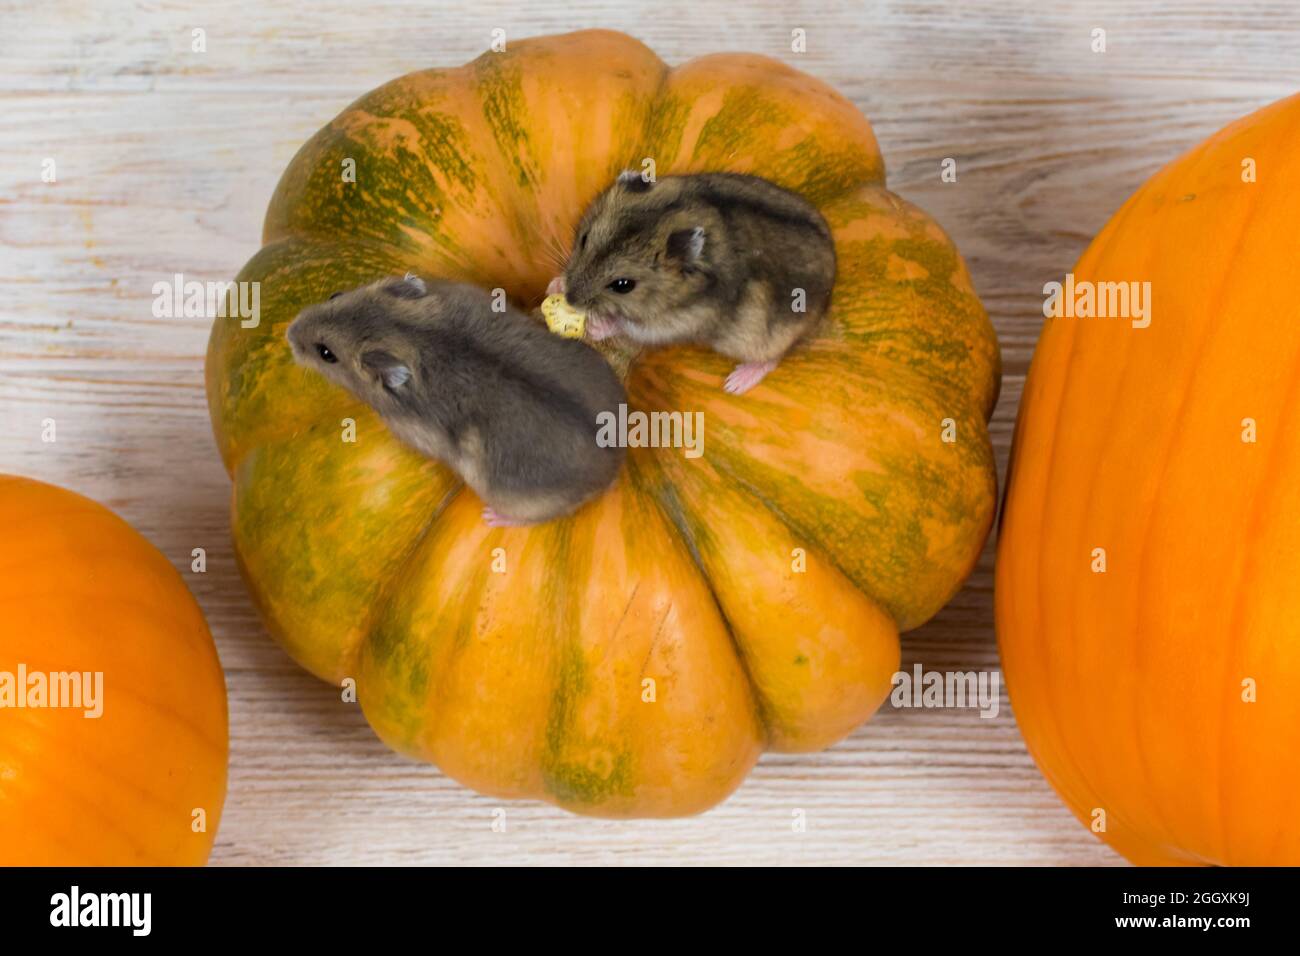 Two little Dzungarian hamsters are sitting on an orange pumpkin. View from above. Stock Photo